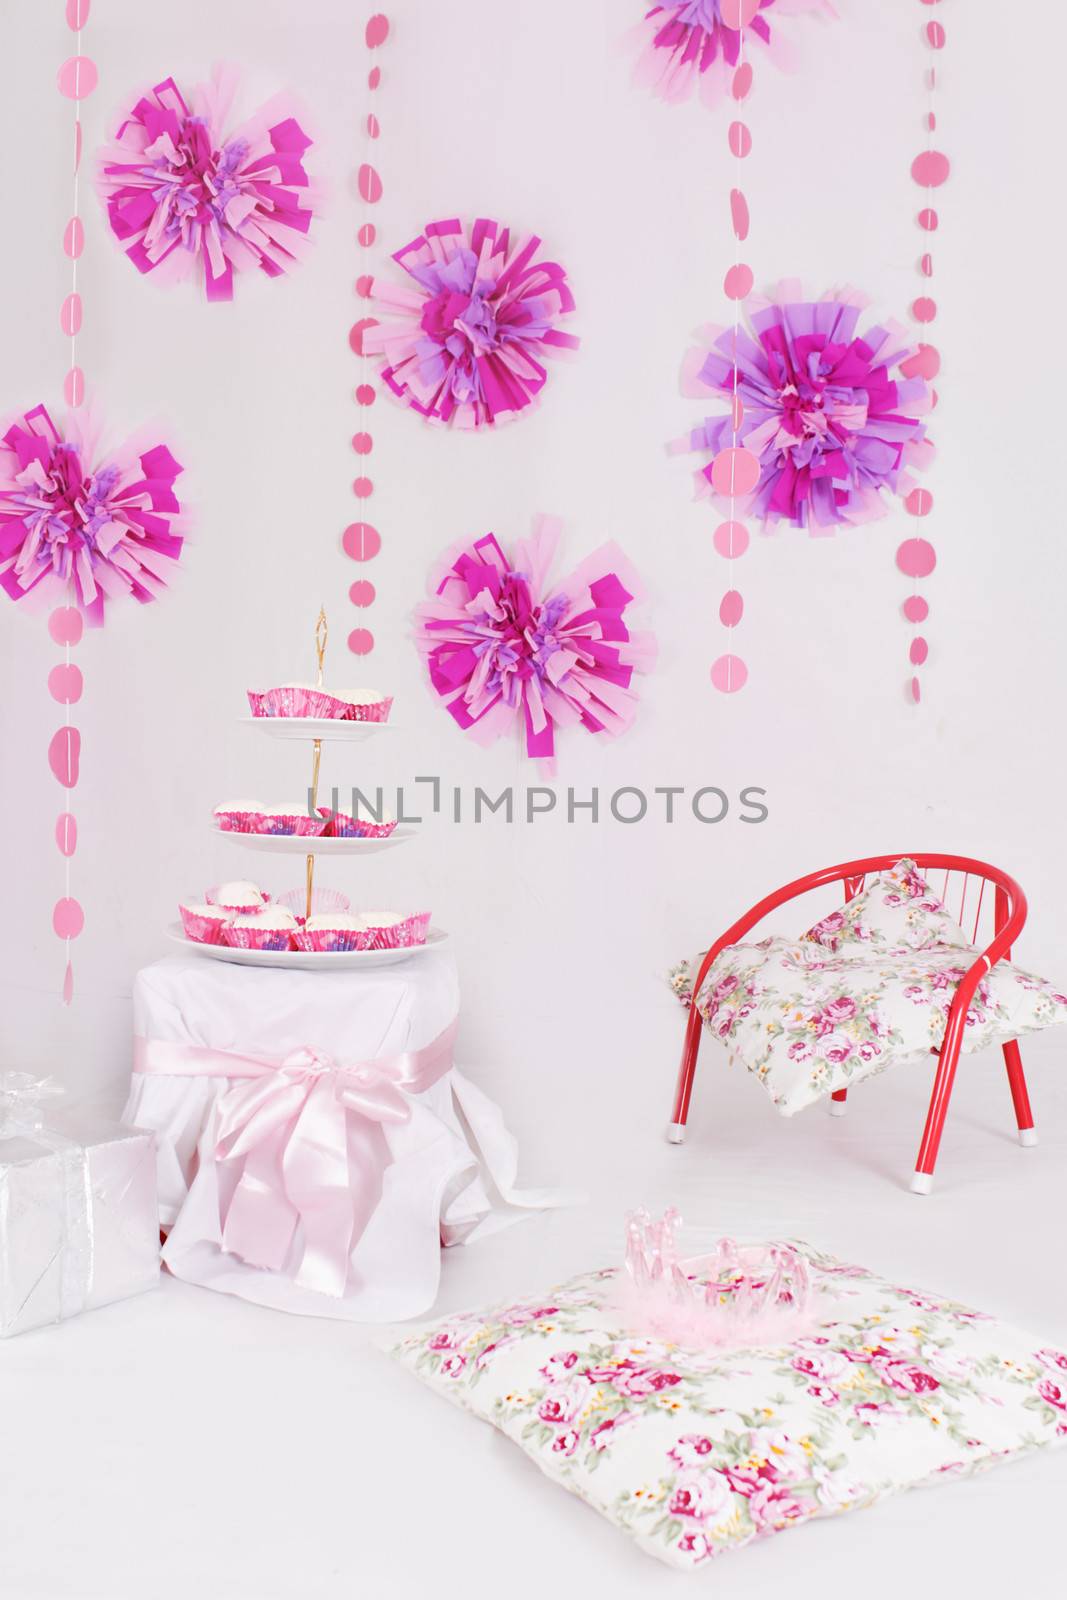 Dessert table with sweets for pink decoration party